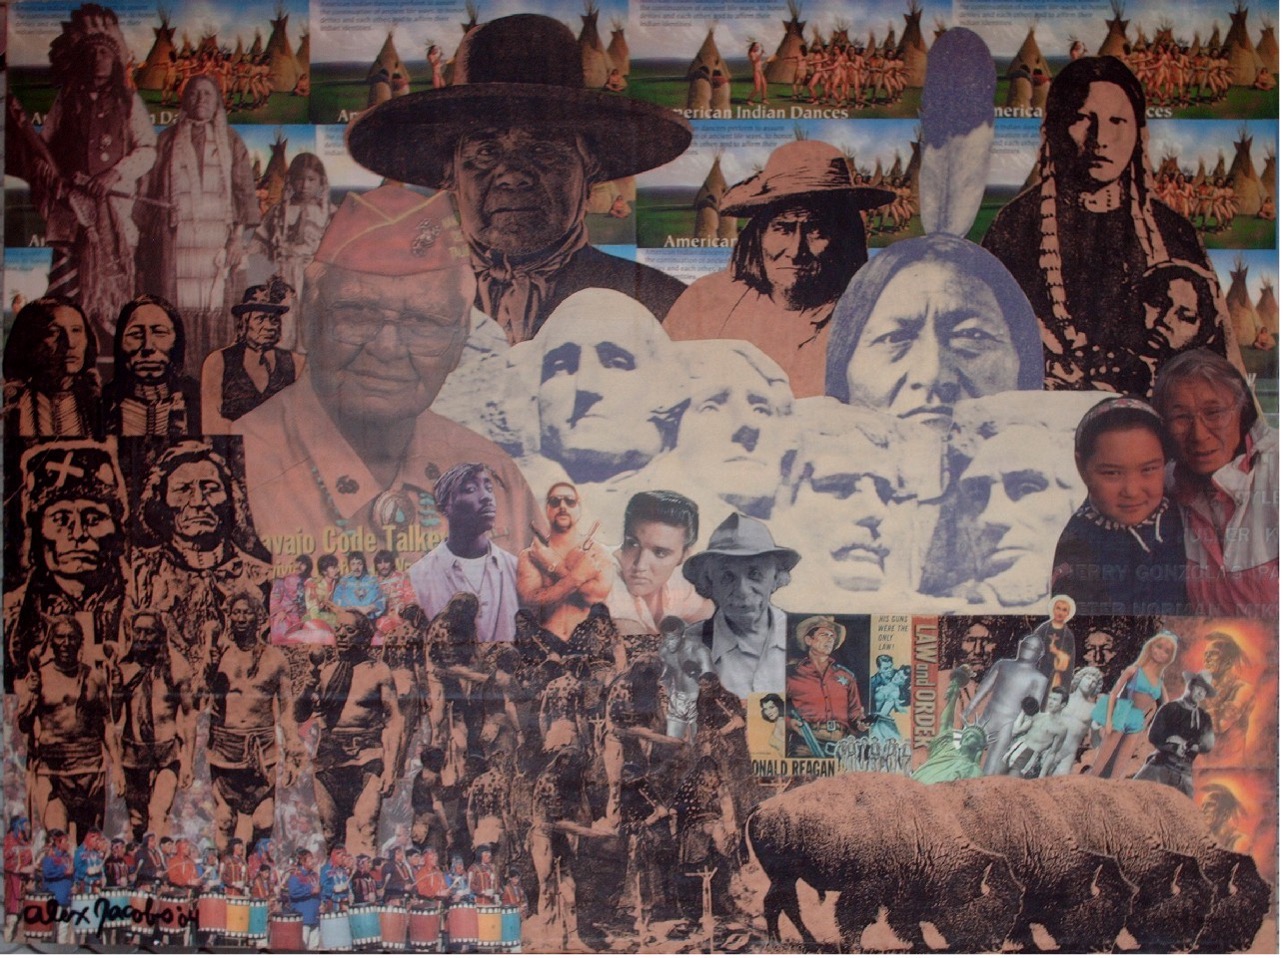 Colorful collage including American, Western, and Native American imagery